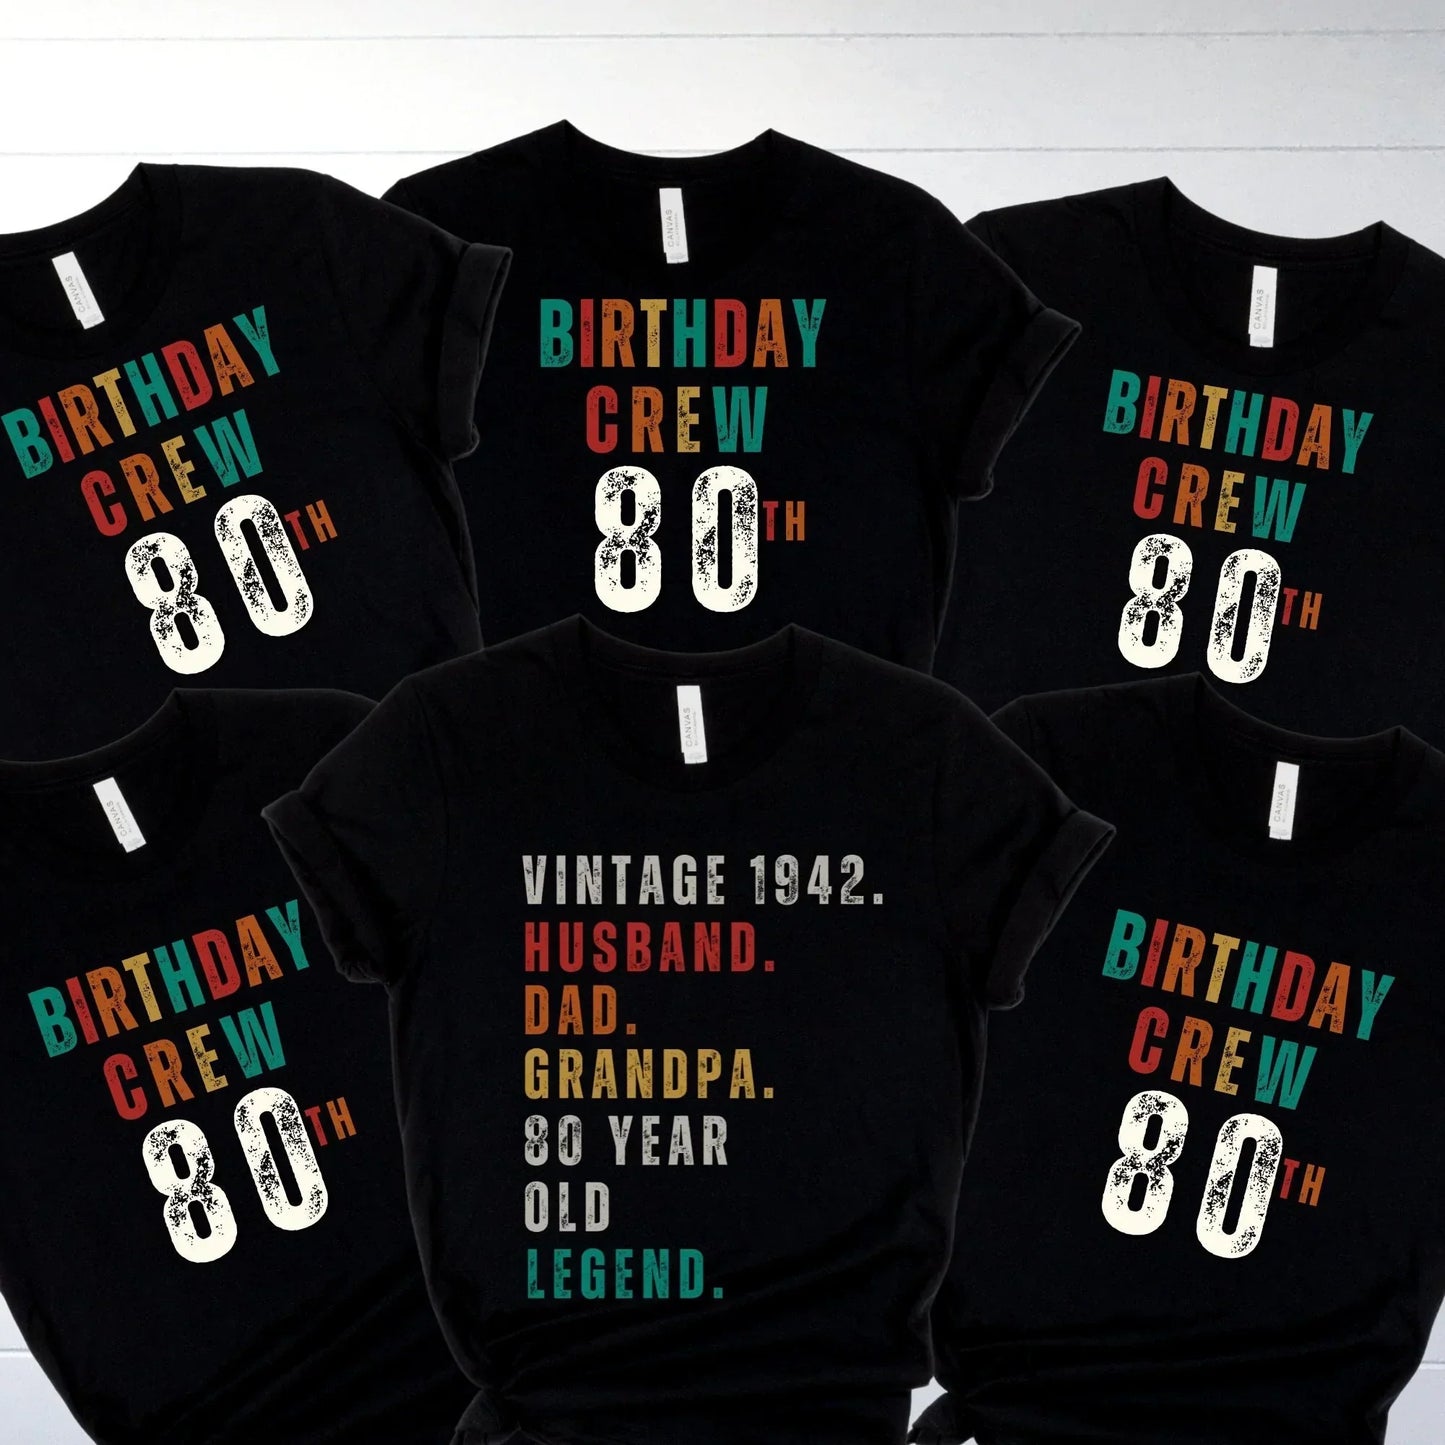 Vintage 1942, 80th Birthday Shirt, Matching Group Birthday Crew Tees, Birthday Squad, 80th Gift for Granddad, Men's Birthday Party Tees